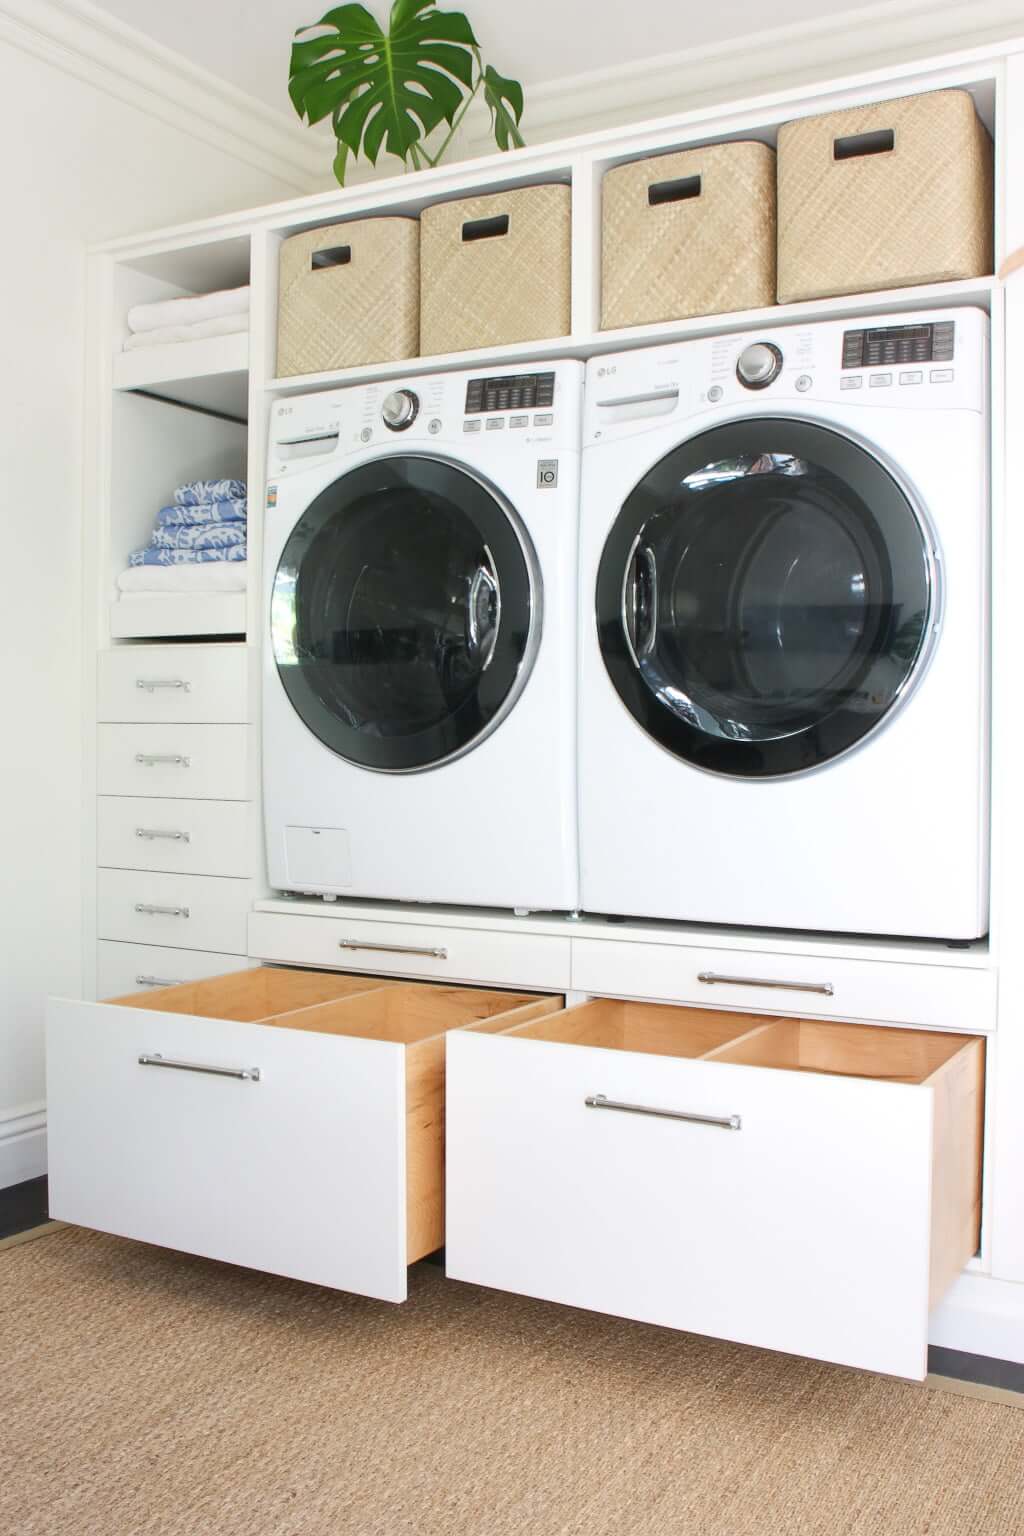 Drawers Under Washer and Dryer: What SHOULD You Use Them For?